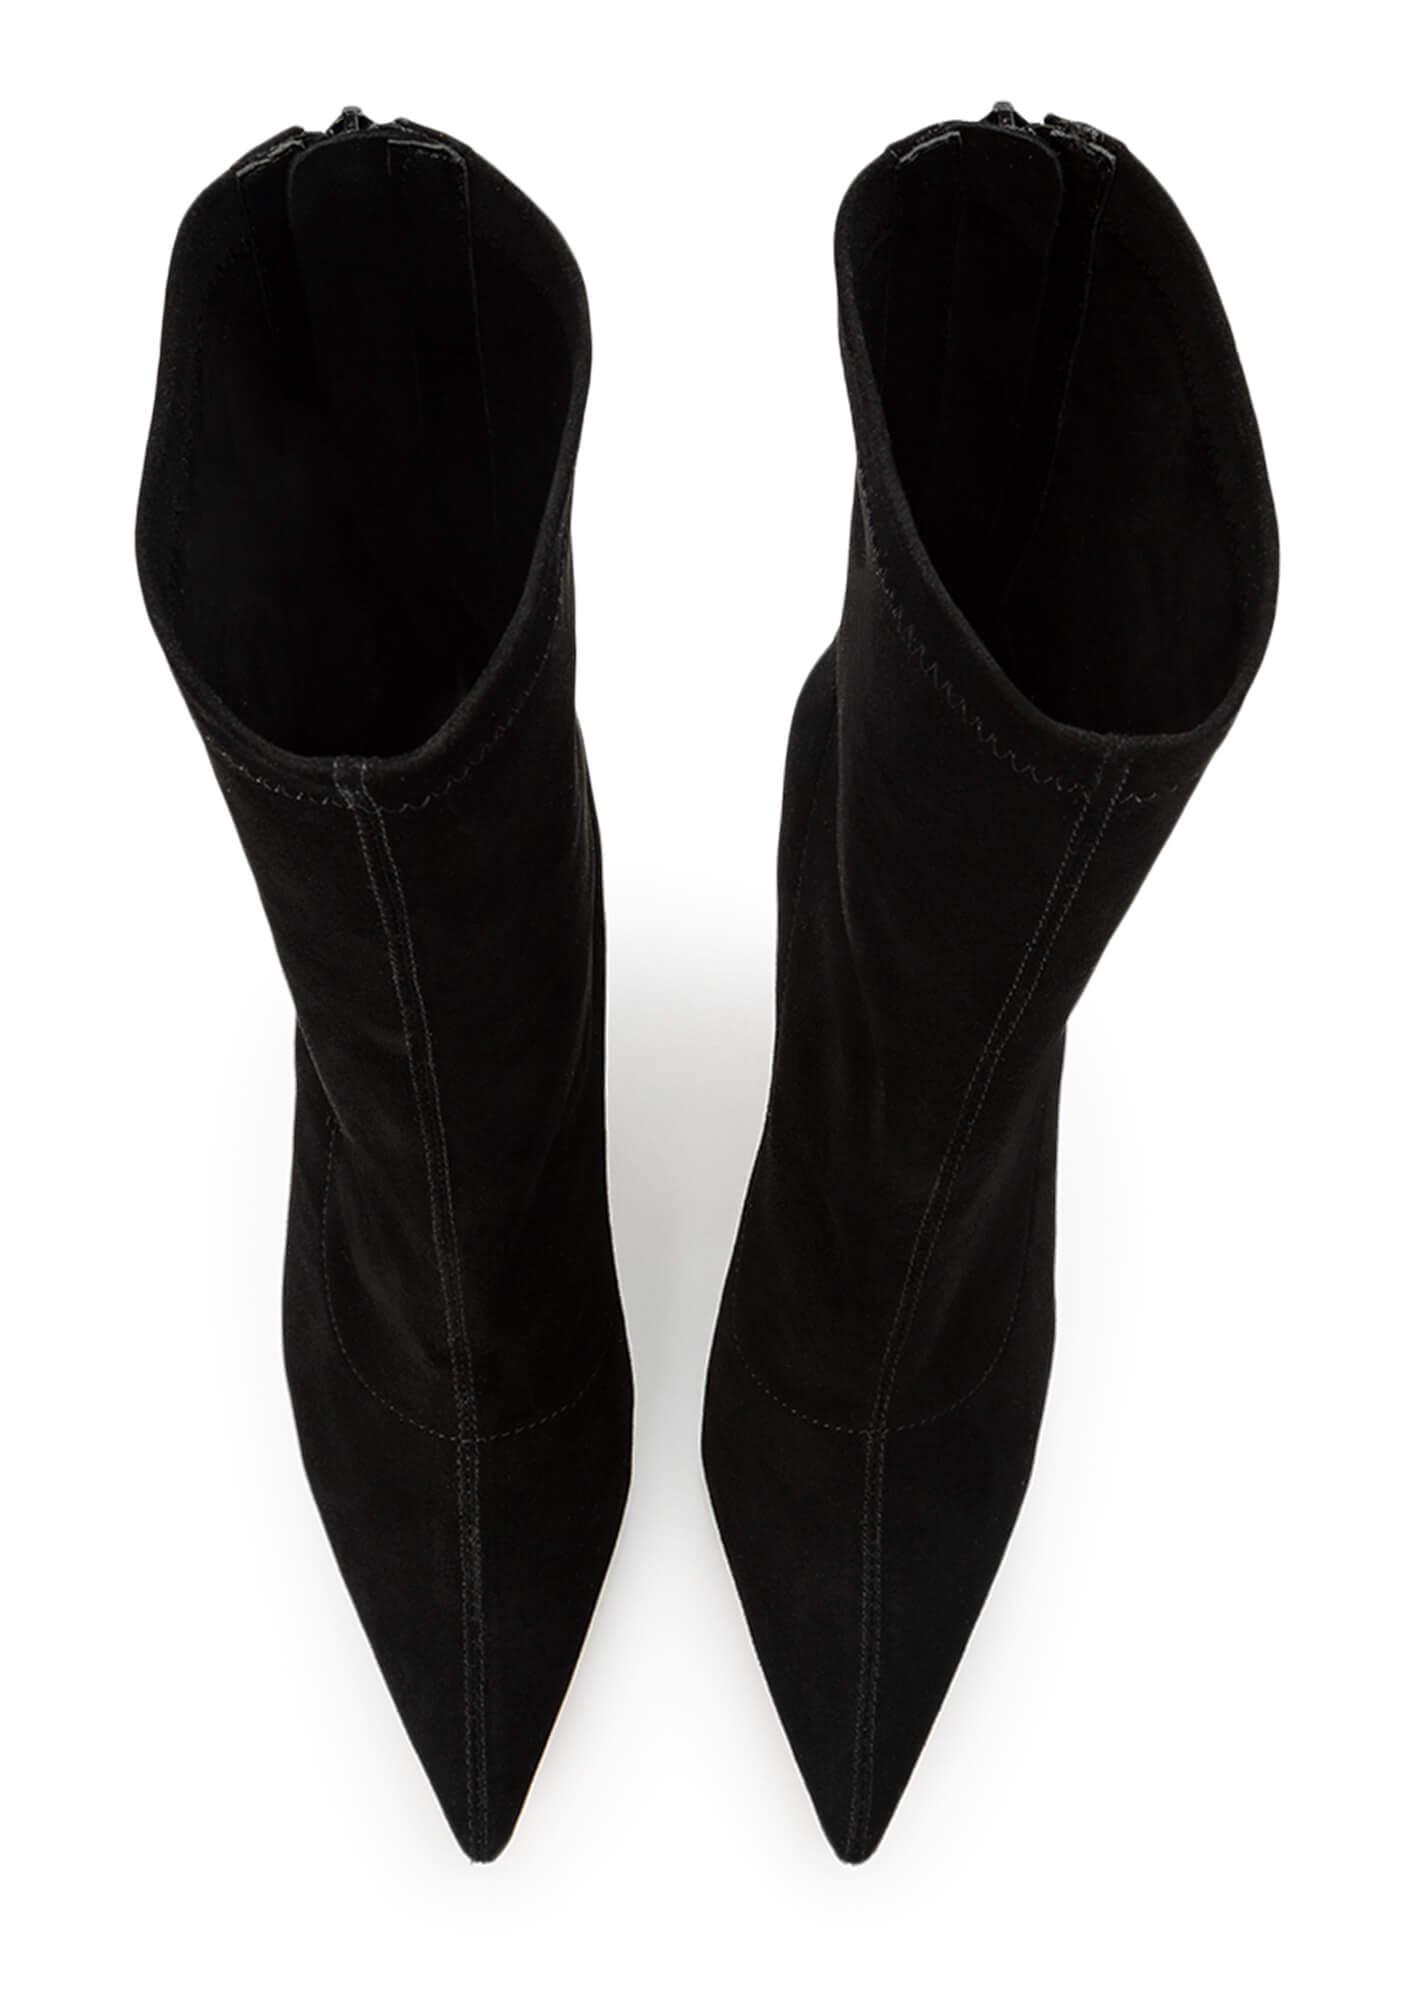 Tony Bianco Suede Kitty 9.5cm Ankle Boots in Black Suede (Black) | Lyst